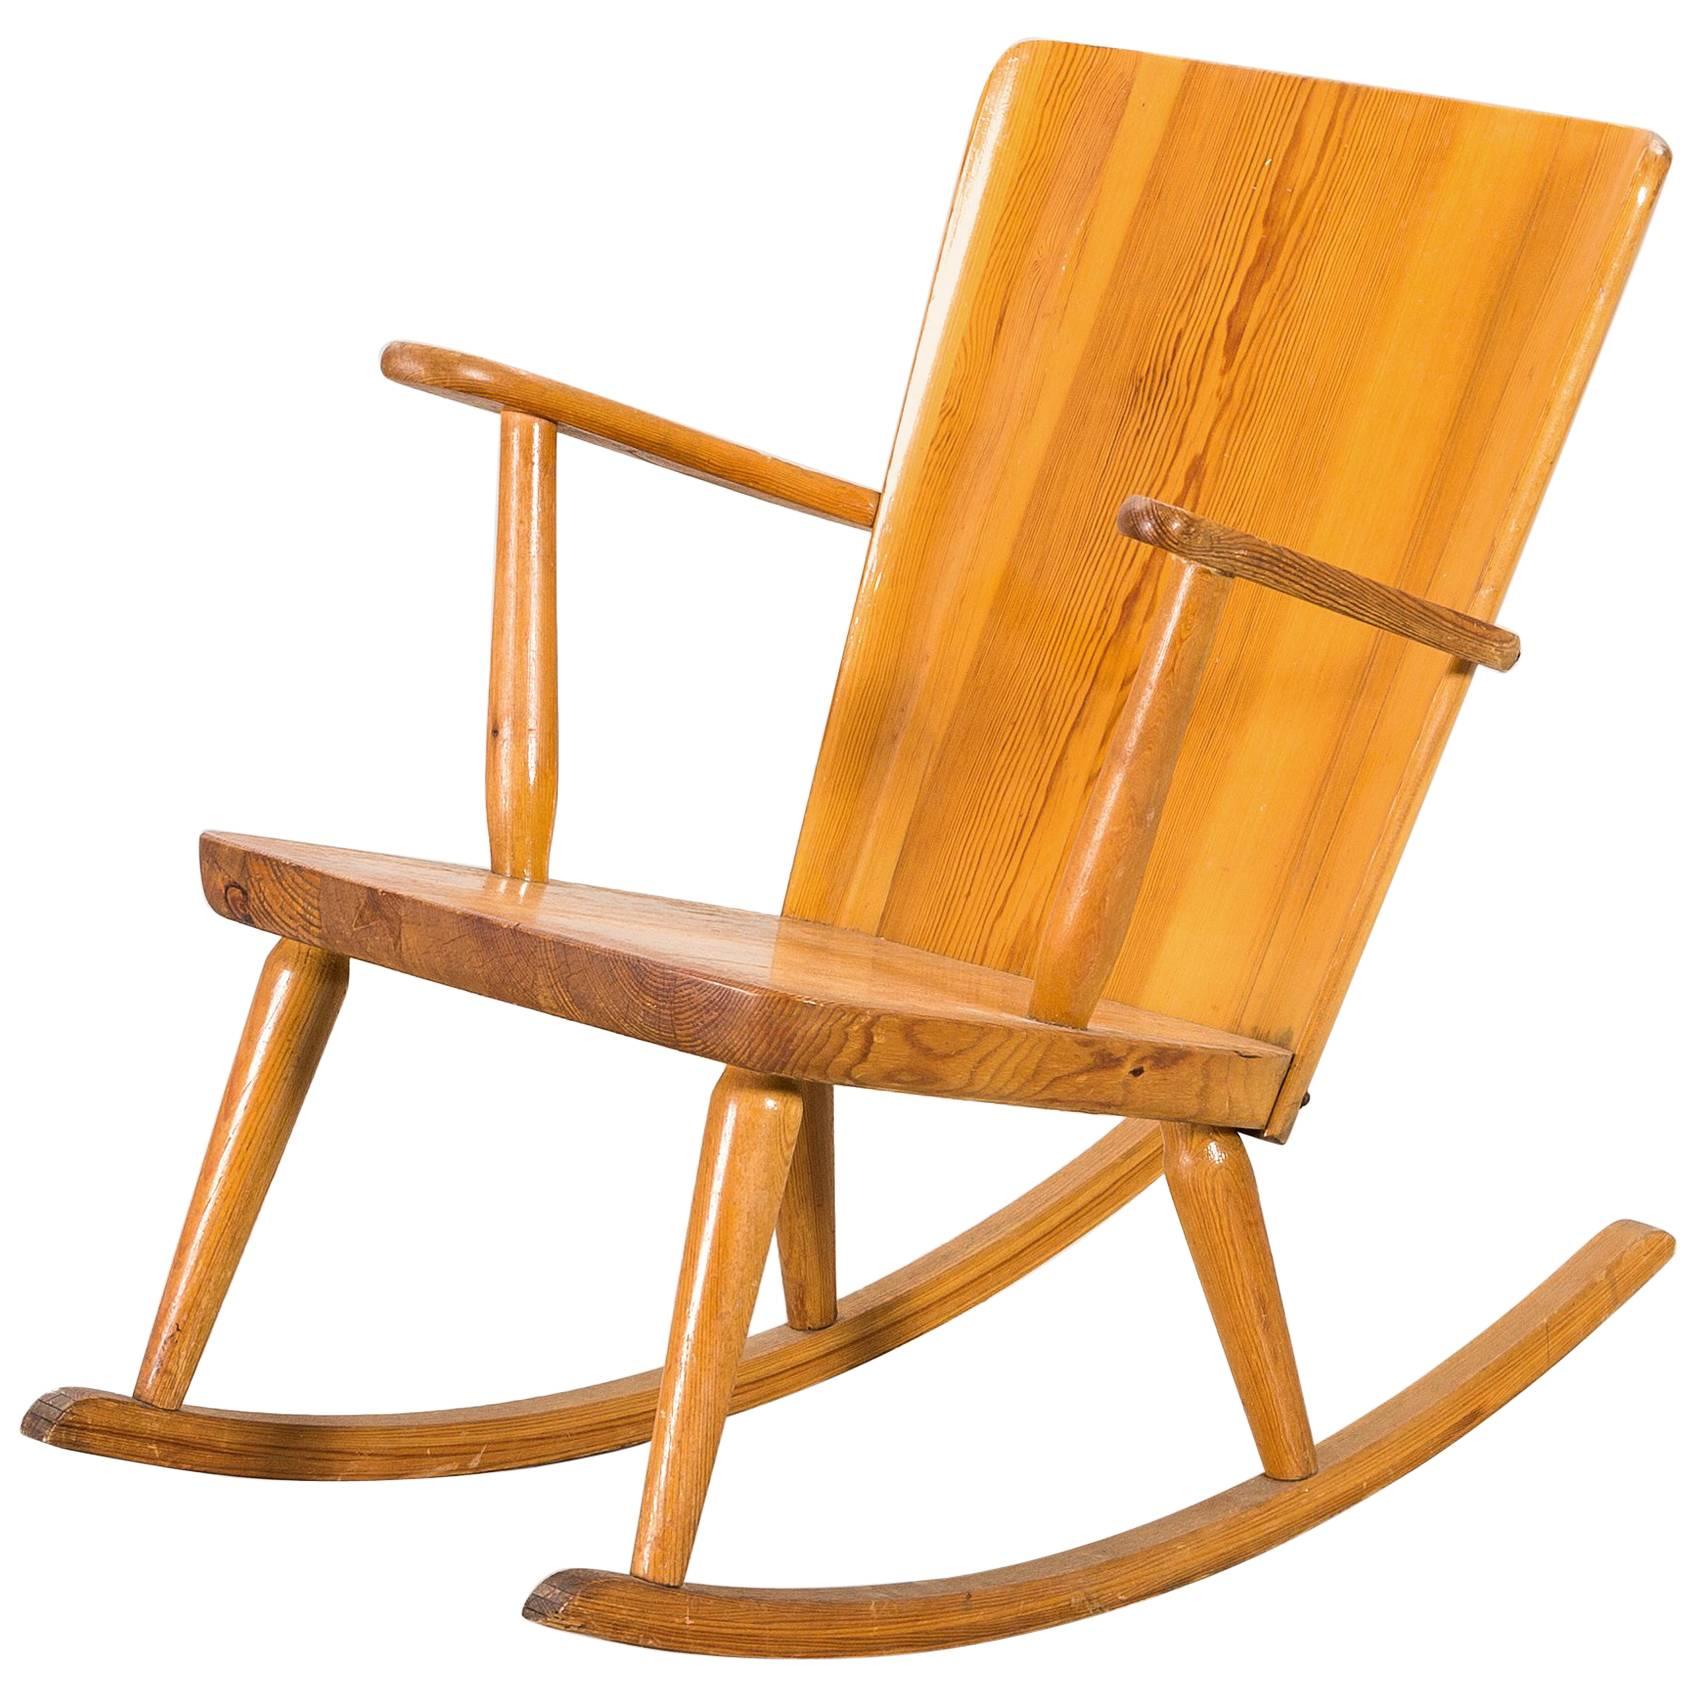 Goran Malmvall Rocking Chair, by Karl Andersson & Soner, Sweden, 1945